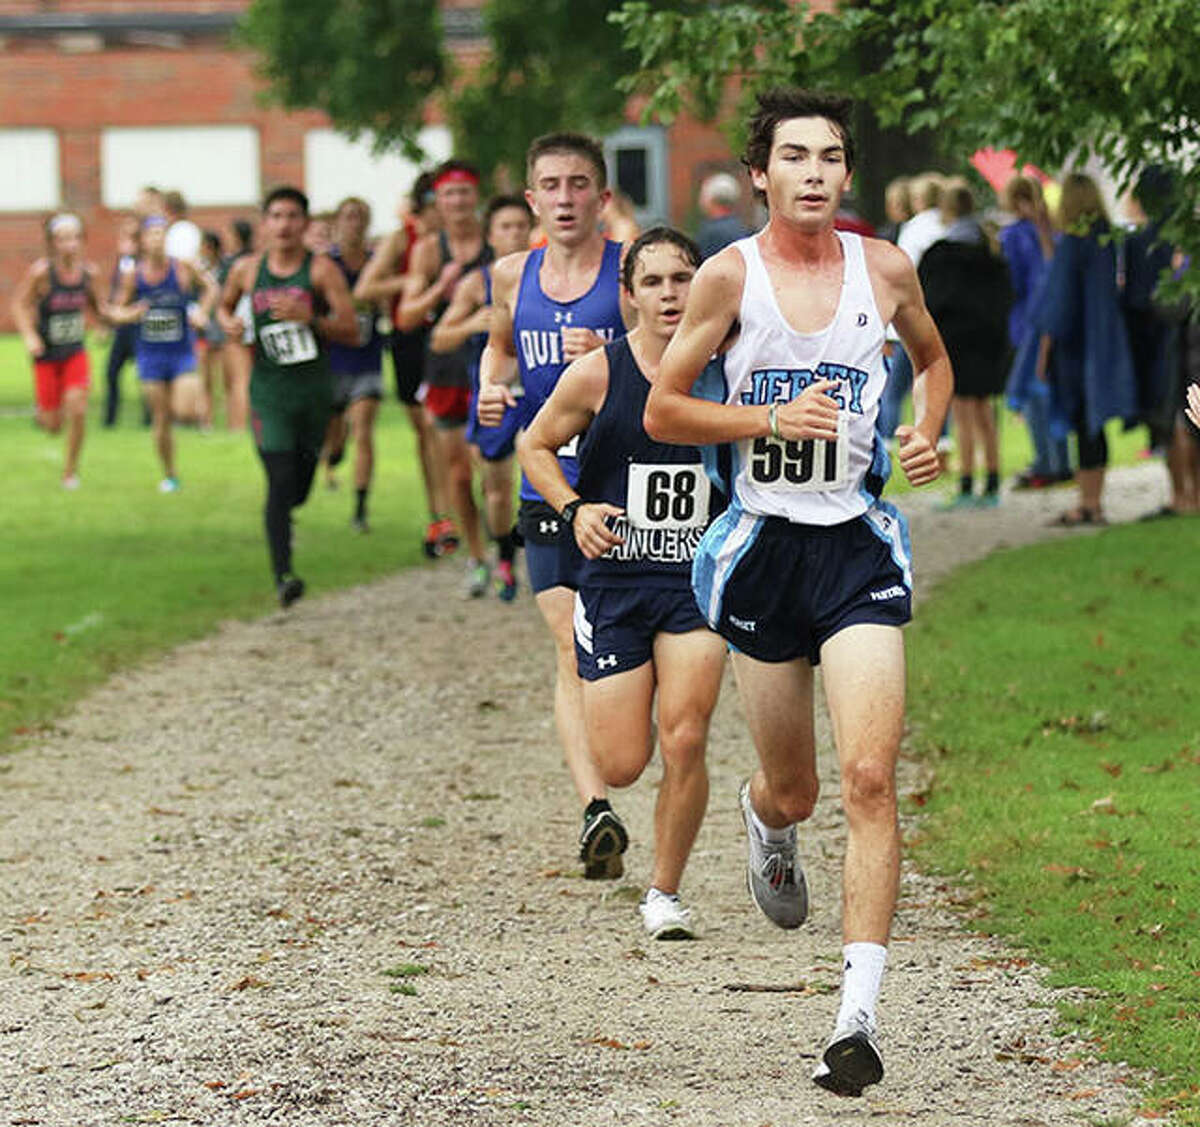 Jersey junior Griffin Williams (front) leads a line of runners in the final quarter-mile of the Granite City Invite on Saturday.